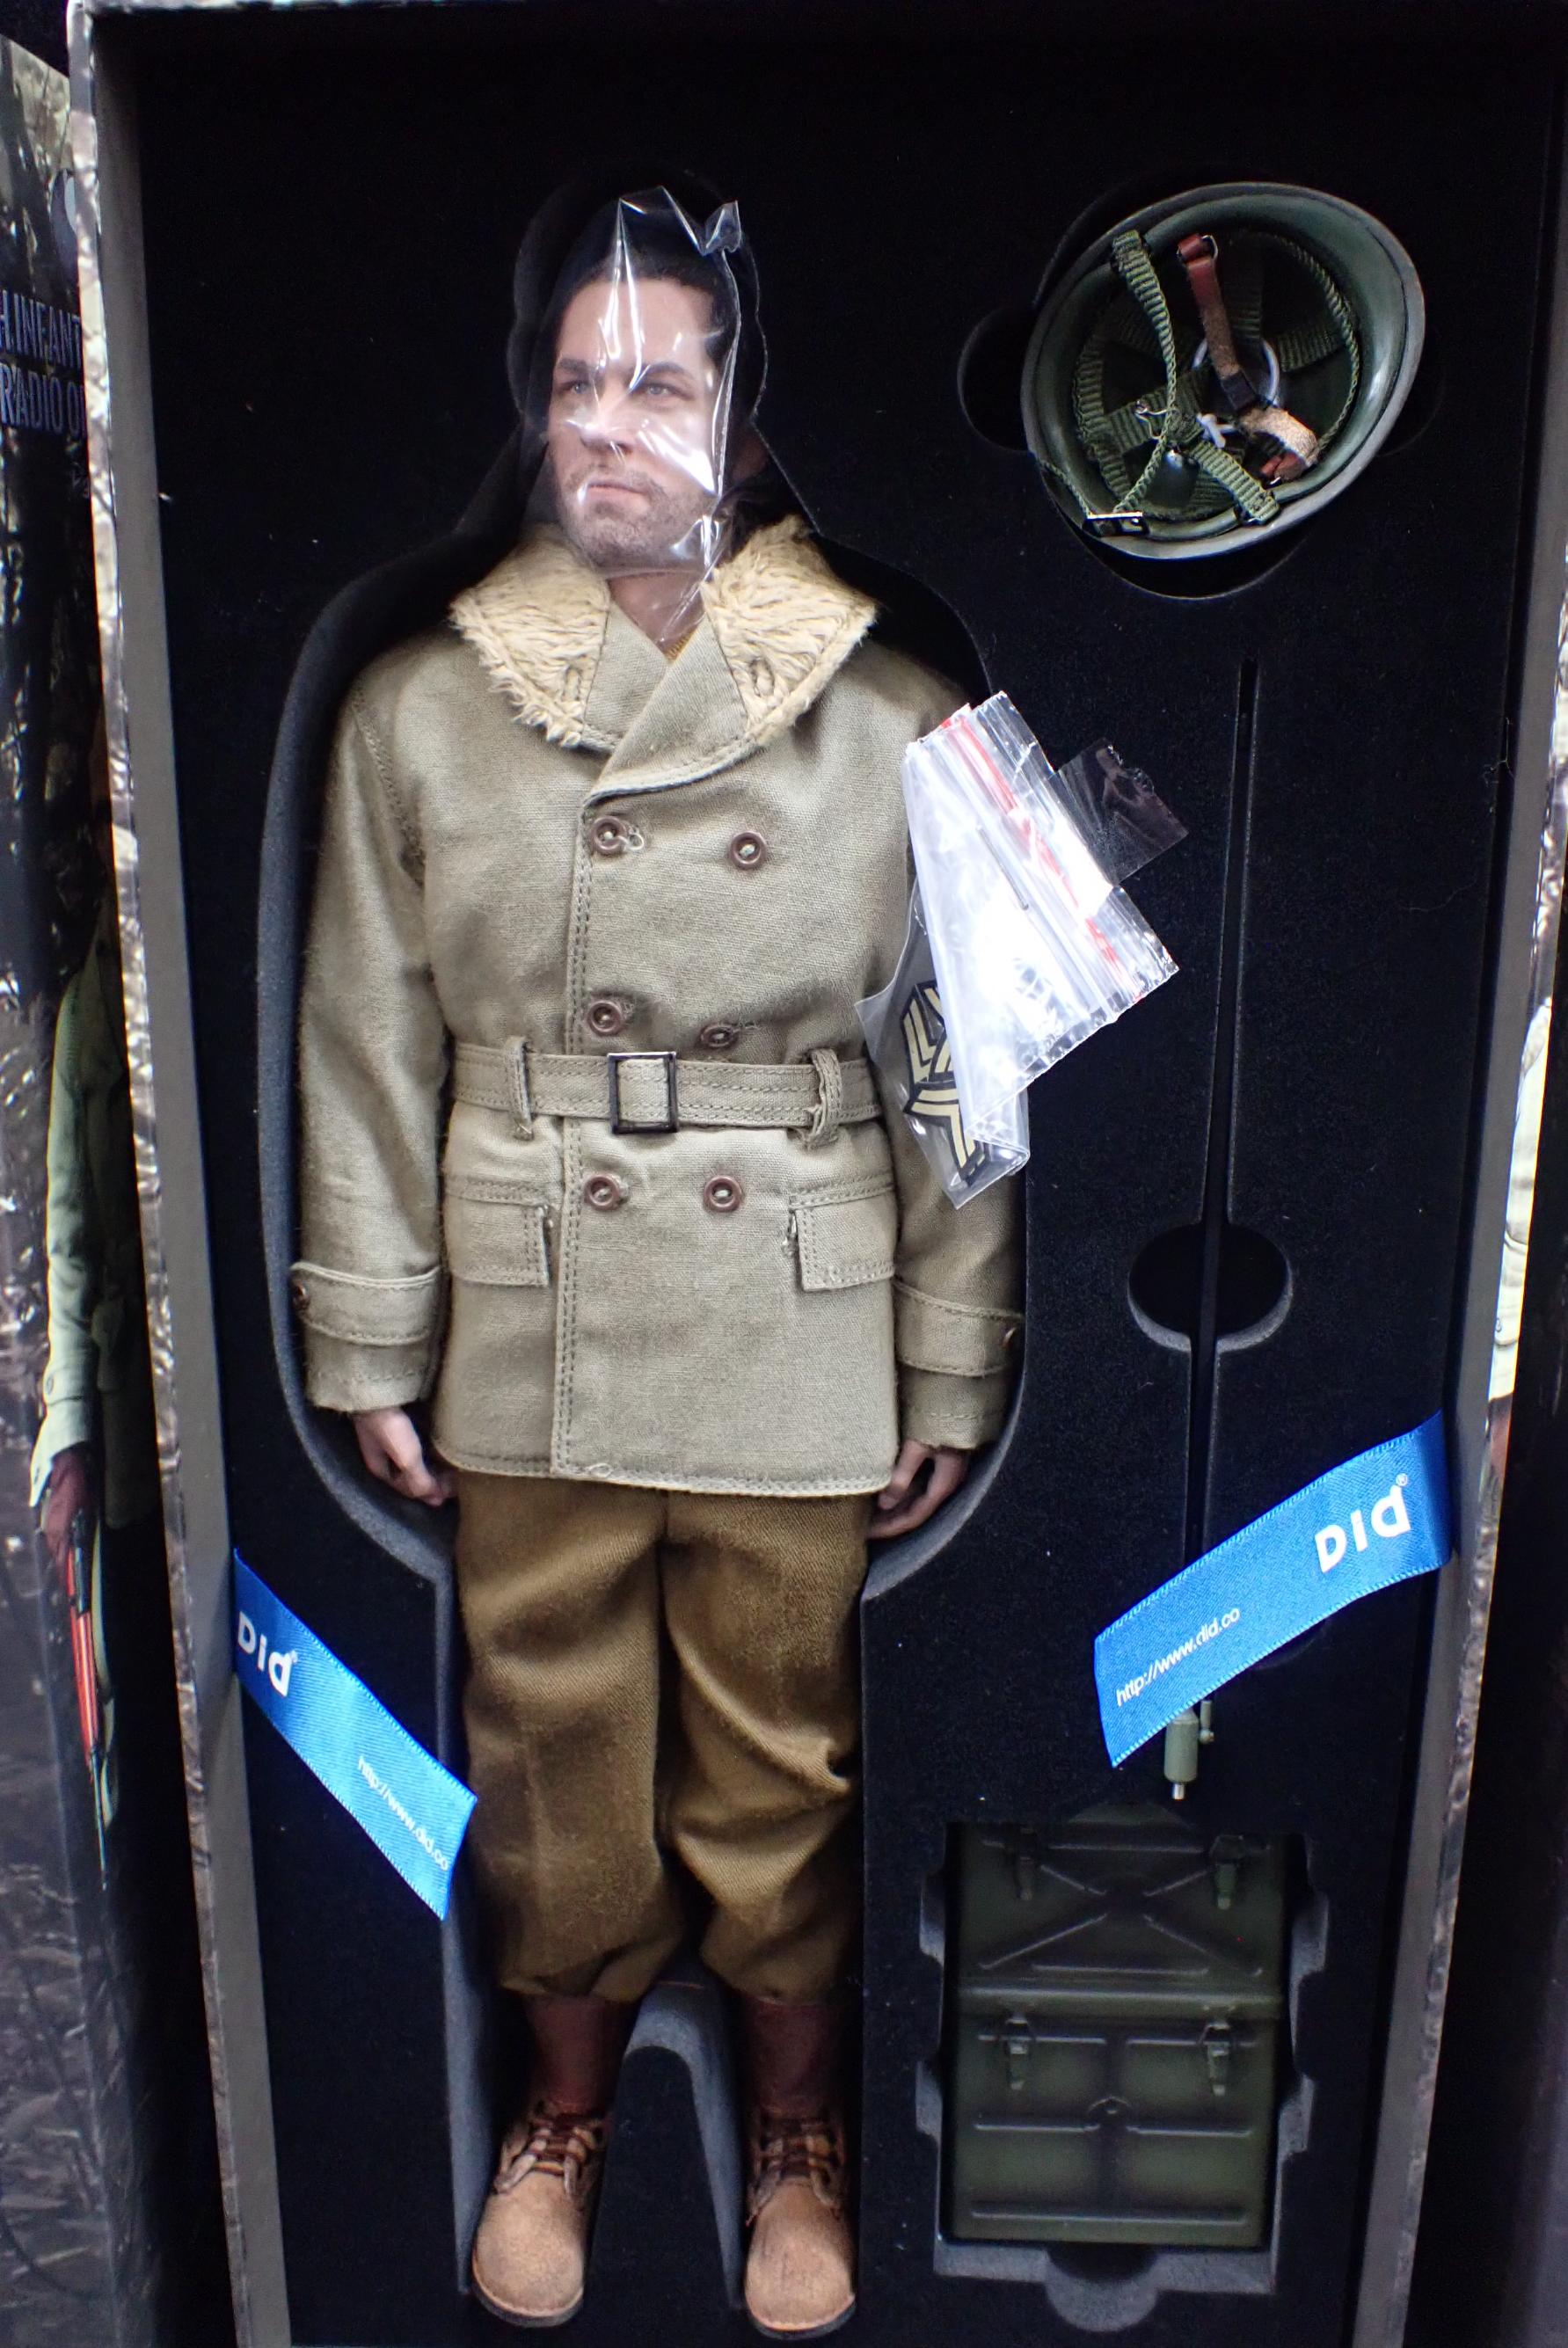 DID CORPORATION No.A80115 29th INFANTRY DIVISION "RADIO OPERATOR" 'PAUL' FIGURE - Image 3 of 3